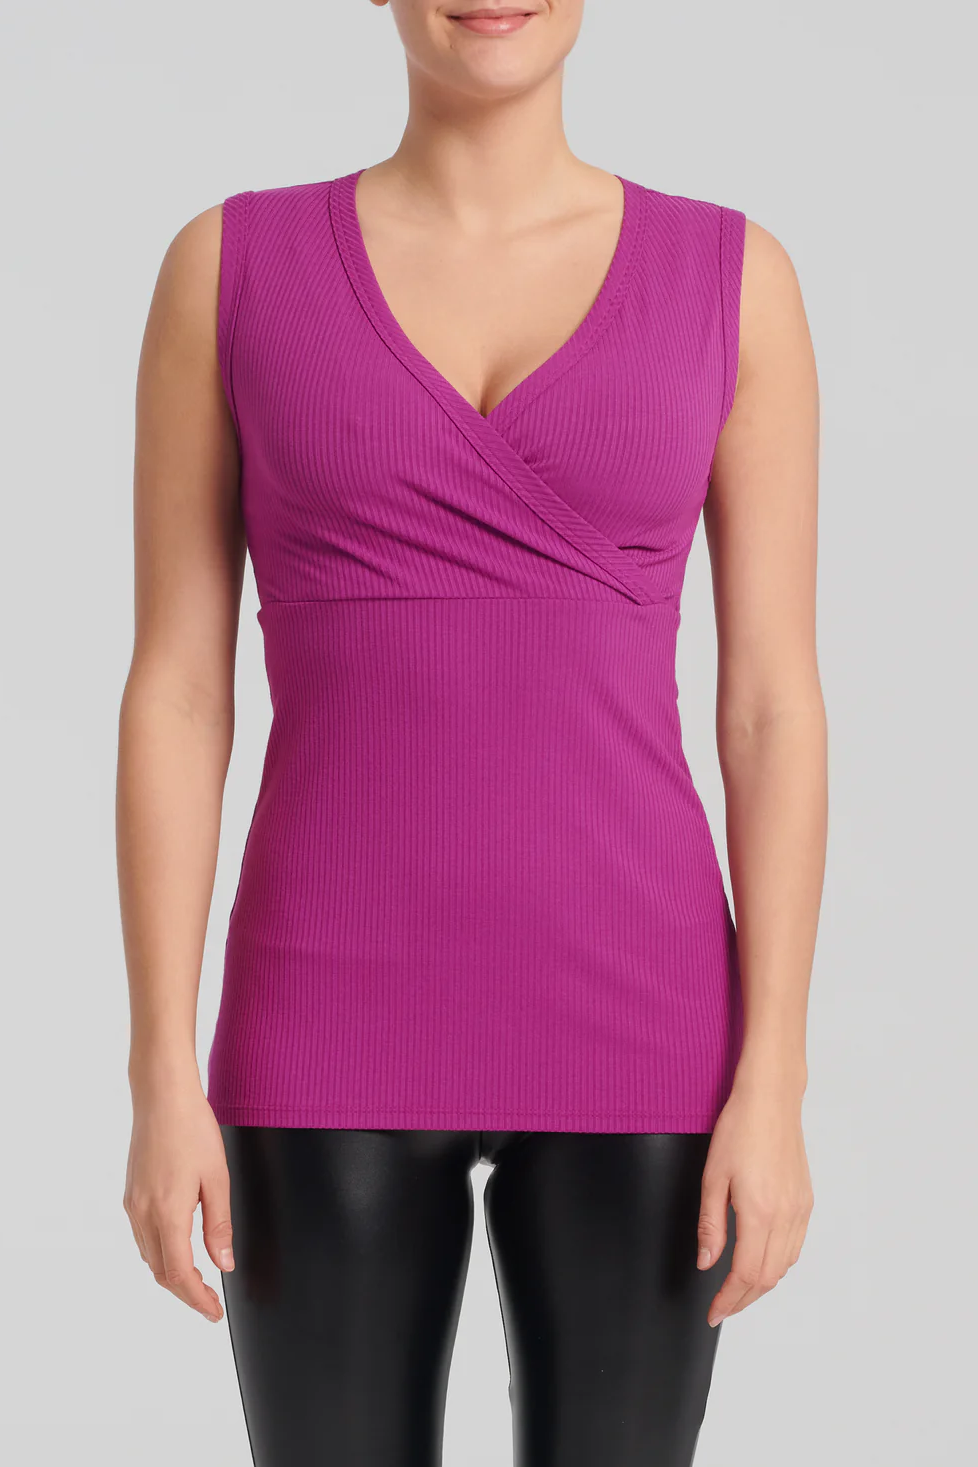 Carla Top by Kollontai, Amethyst, sleeveless top, faux-wrap neckline, empire waist, long and fitted silhouette, eco-fabric, bamboo rib knit, sizes XS to XXL, made in Montreal 